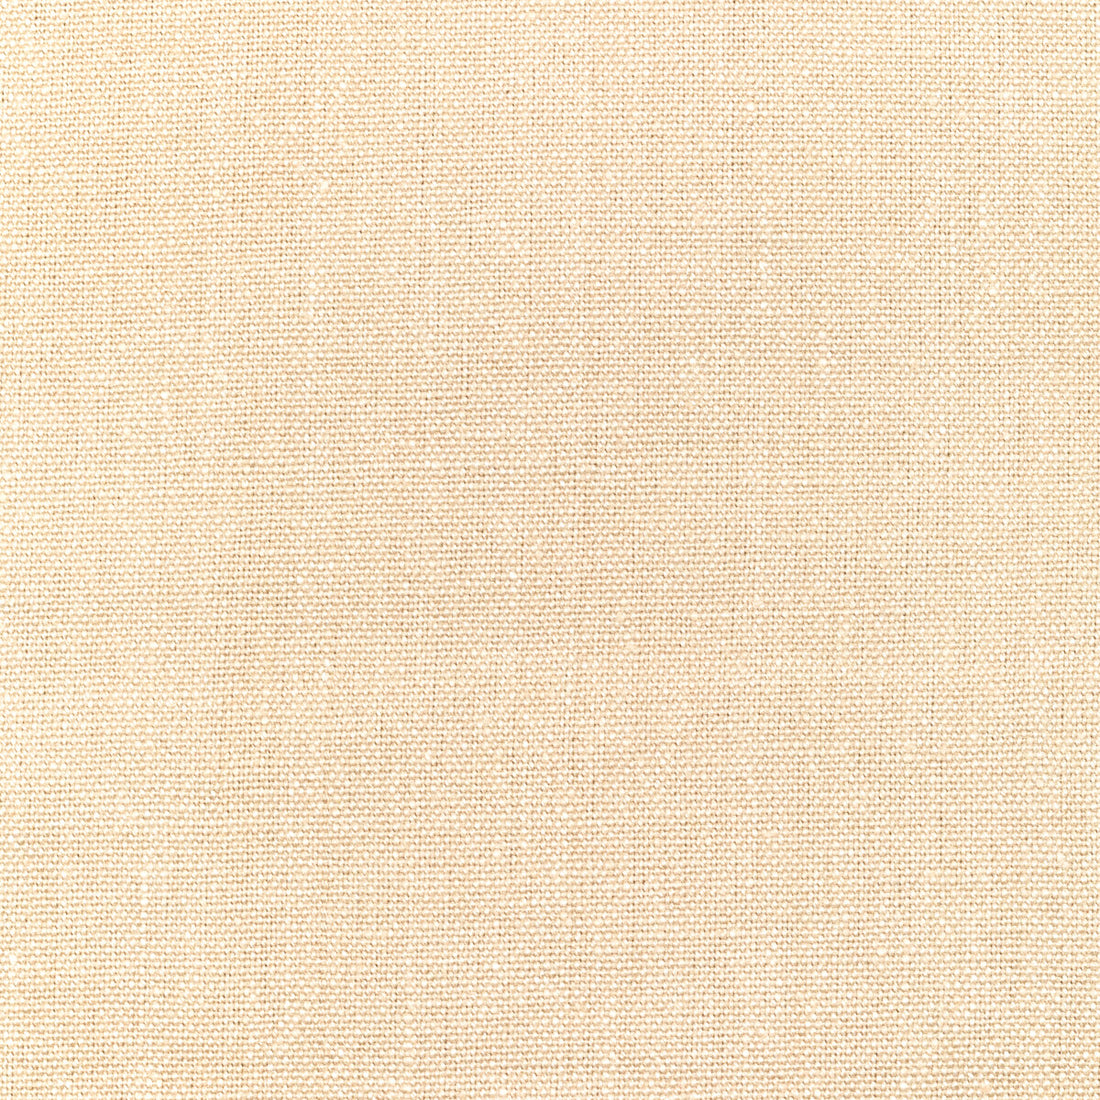 Watermill fabric in natural color - pattern 30421.111.0 - by Kravet Basics in the Perfect Plains collection